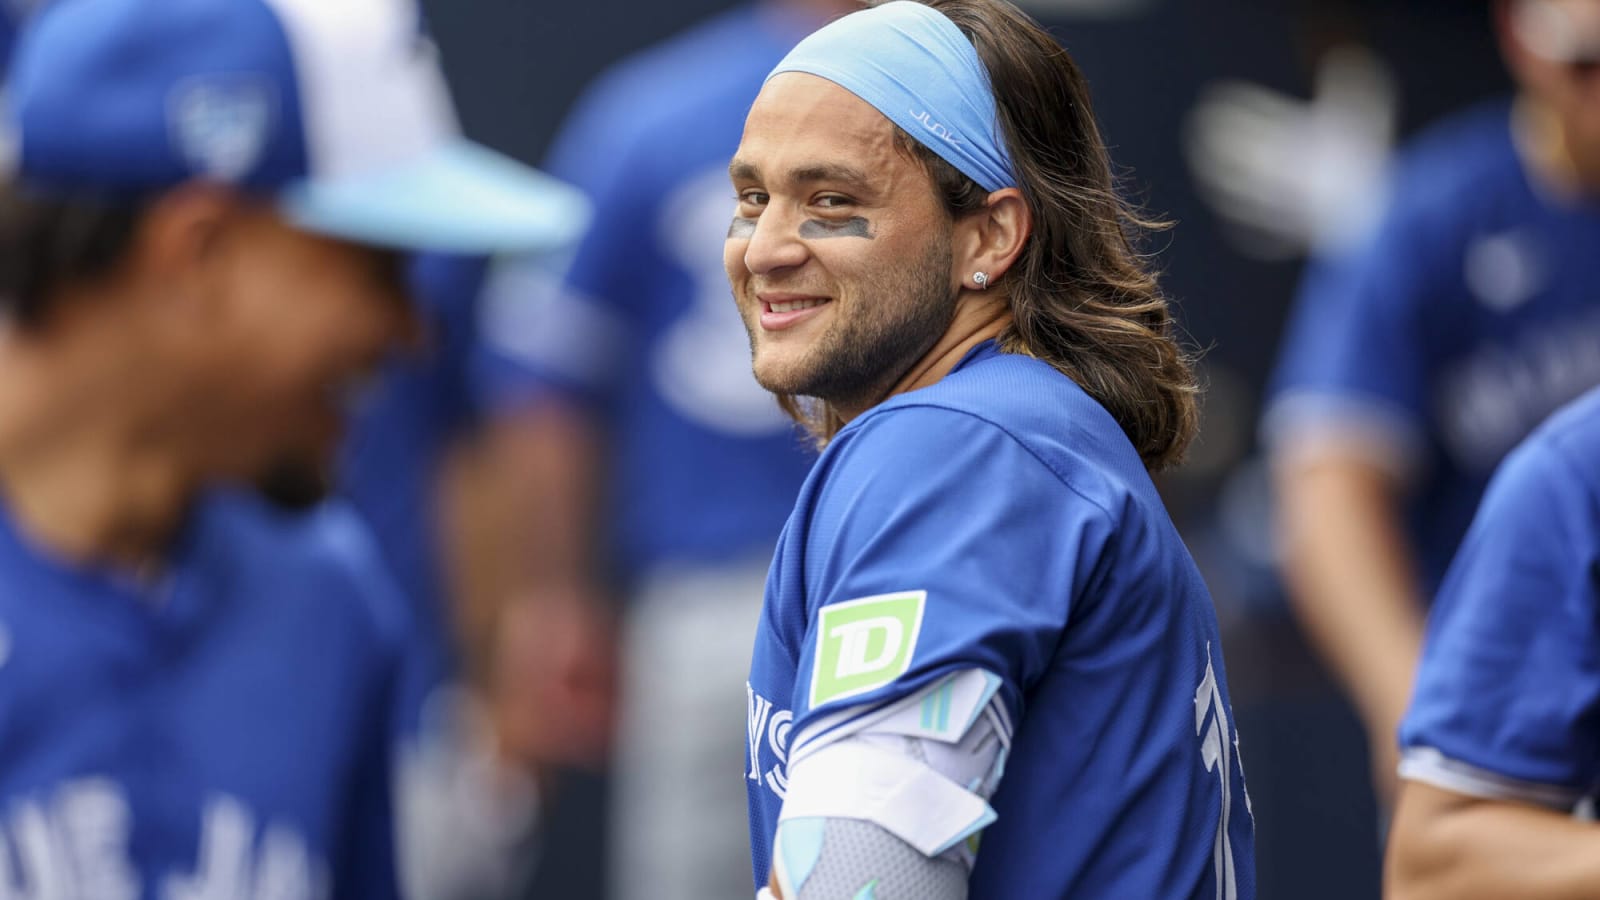 Blue Jays – Bo Bichette returns to the lineup after missing last two games